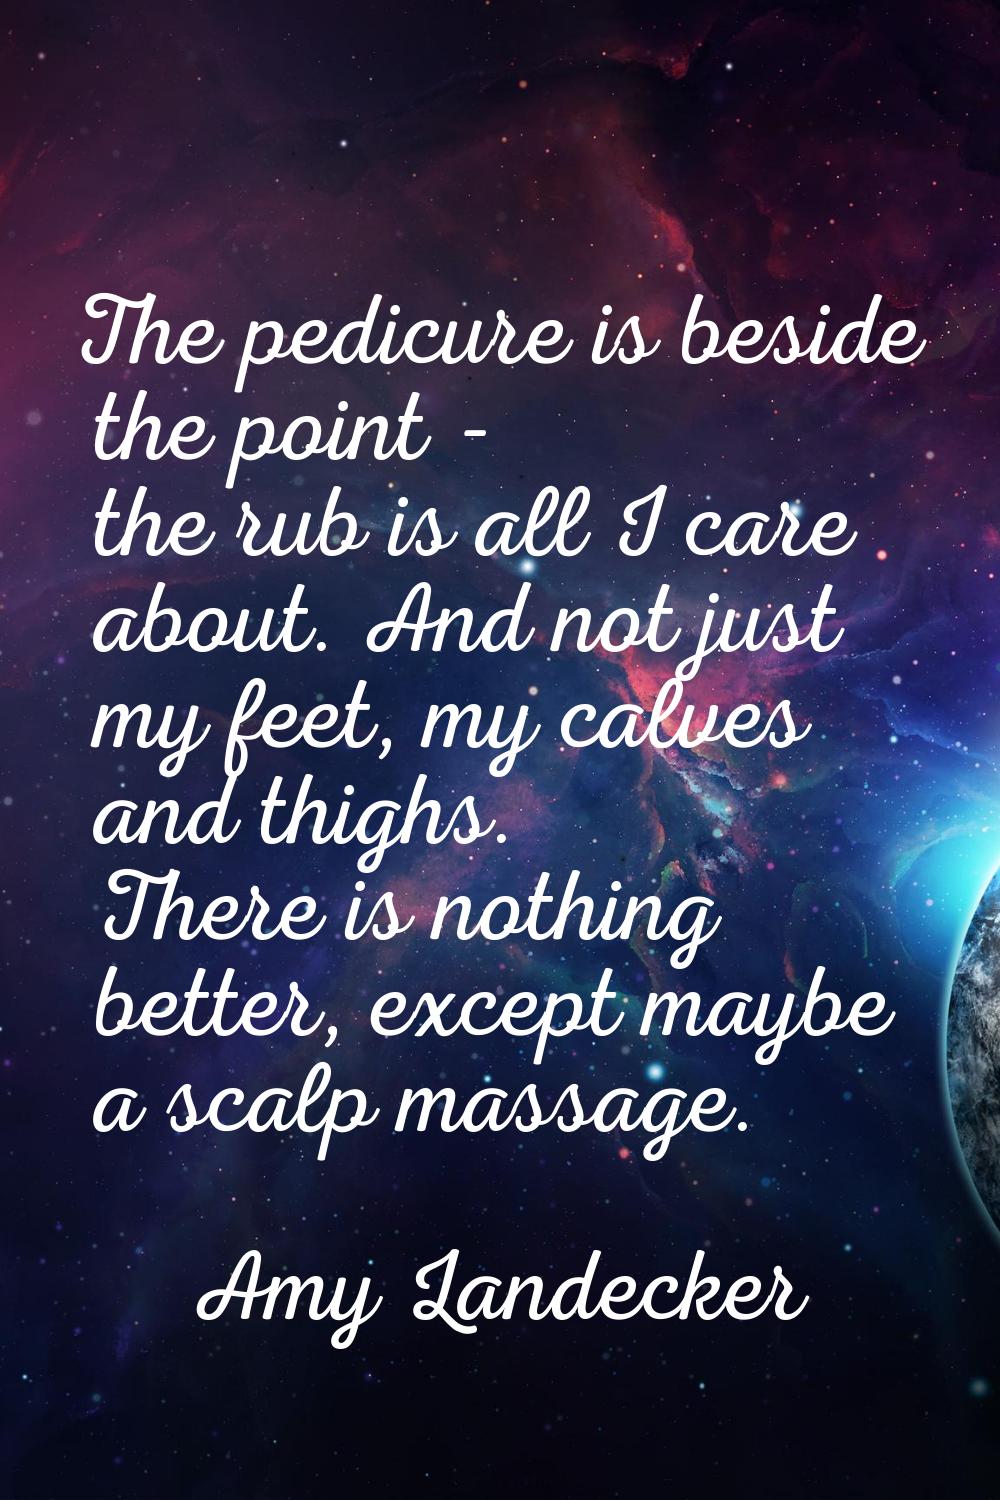 The pedicure is beside the point - the rub is all I care about. And not just my feet, my calves and